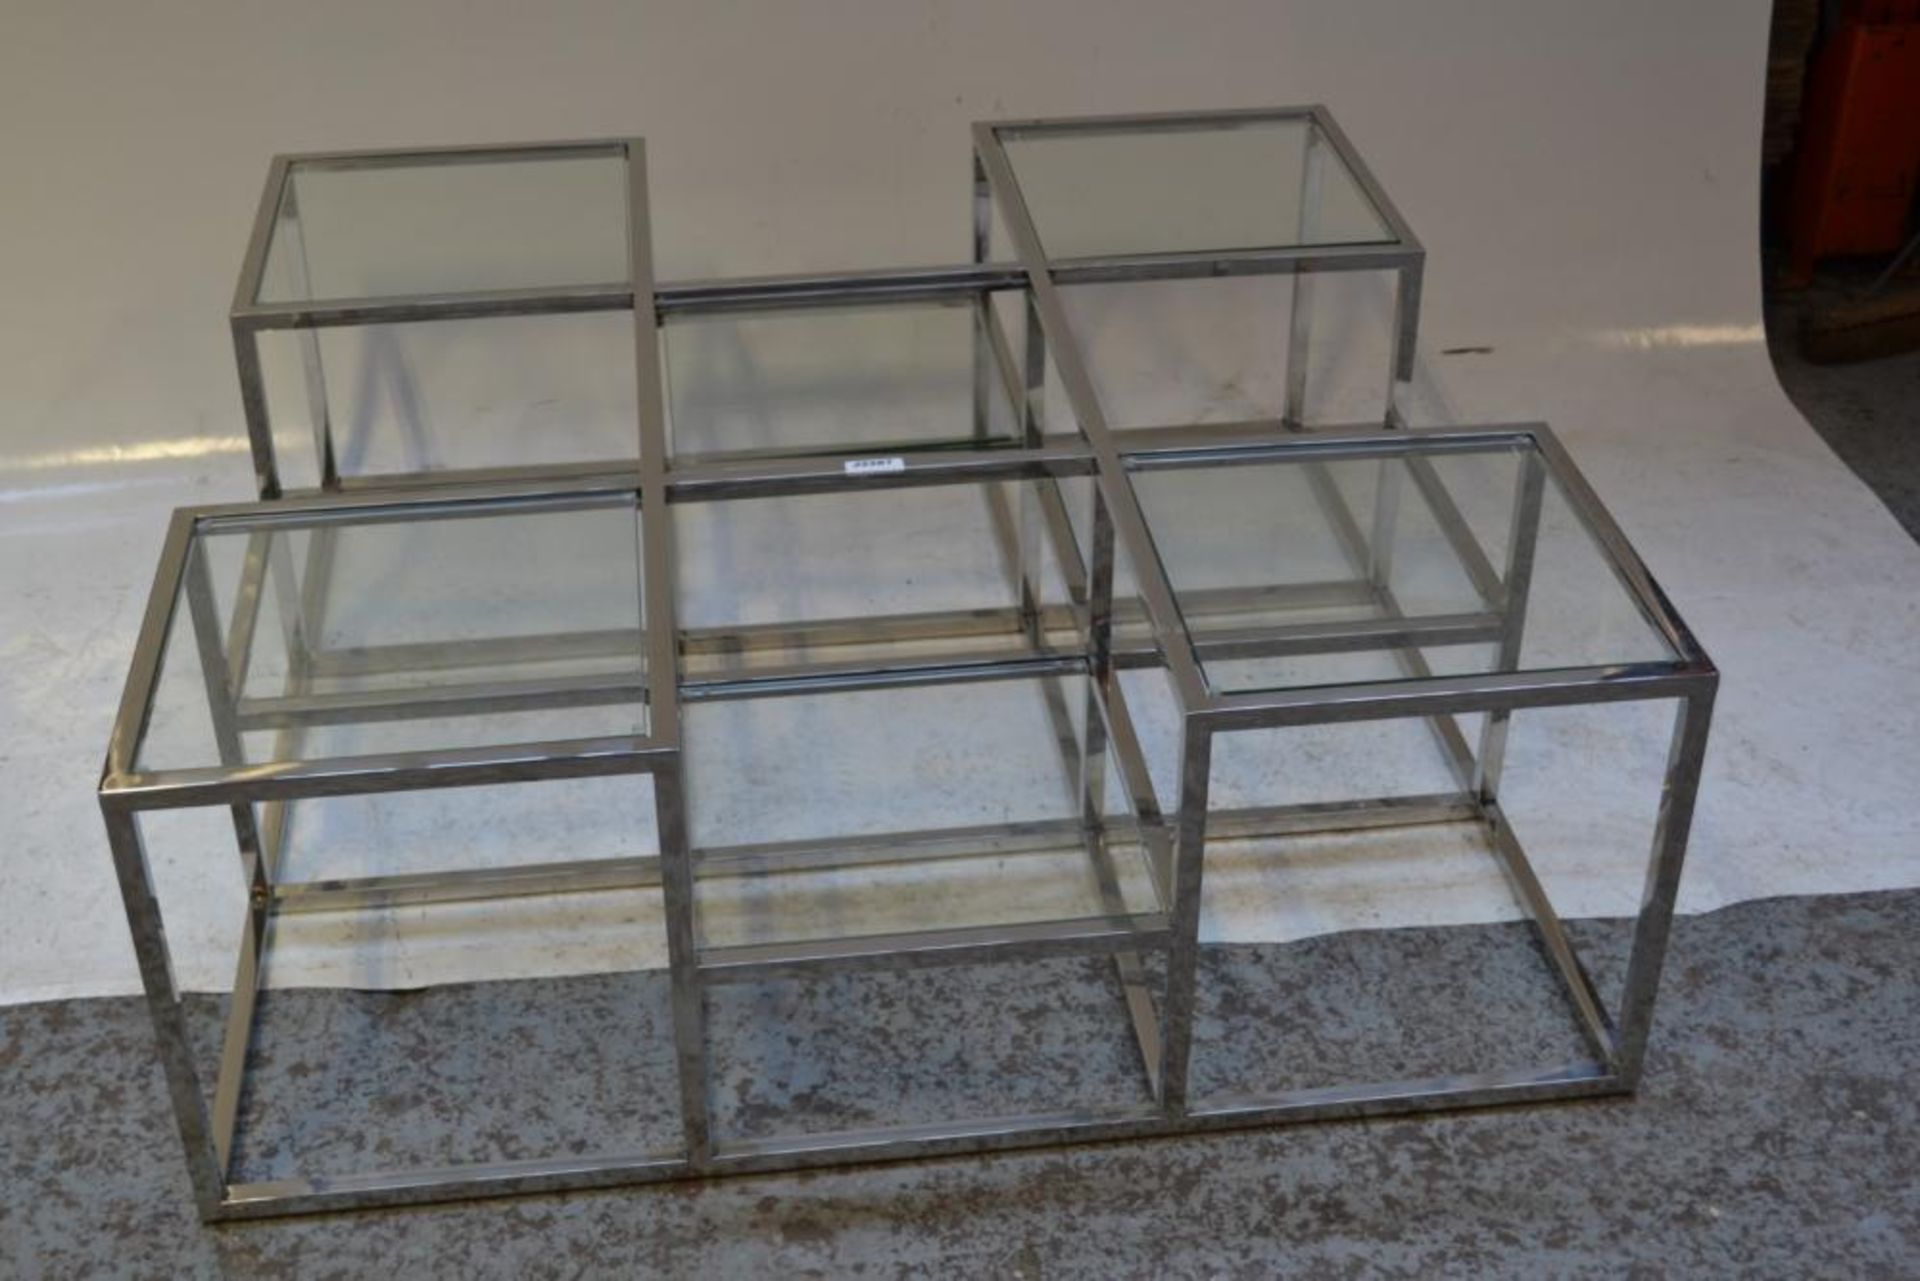 1 x EX DISPLAY METAL AND GLASS MULTI COFFEE TABLE - CL364 - Ref:WH- J2287 - Location: Altrincham WA1 - Image 2 of 4